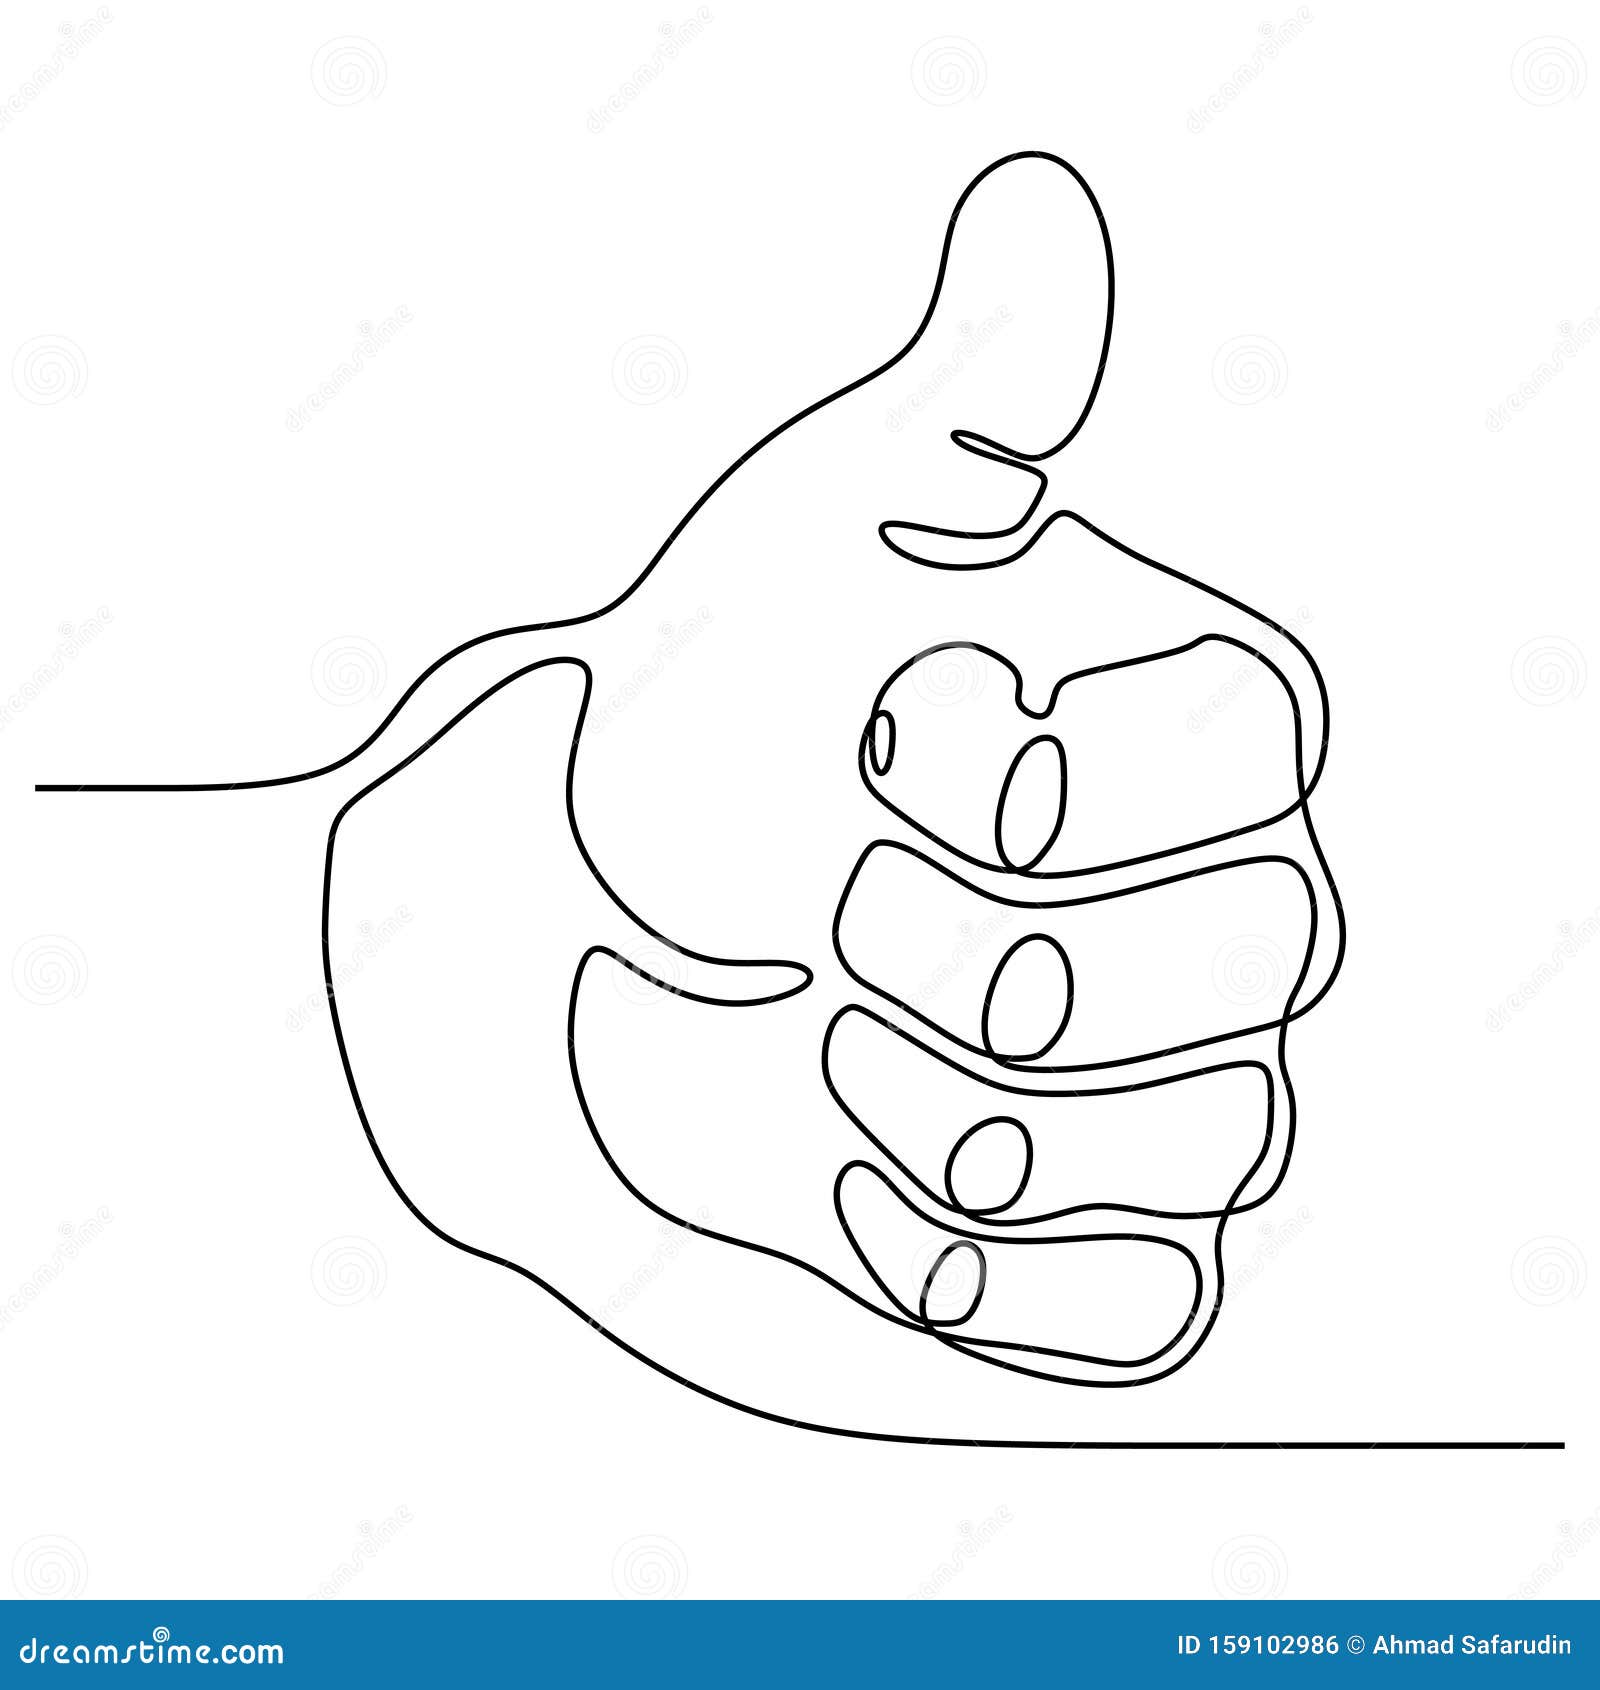 Thumb Up free vector icons designed by Freepik | Free icons, Thumbs up  drawing, Thumbs up icon